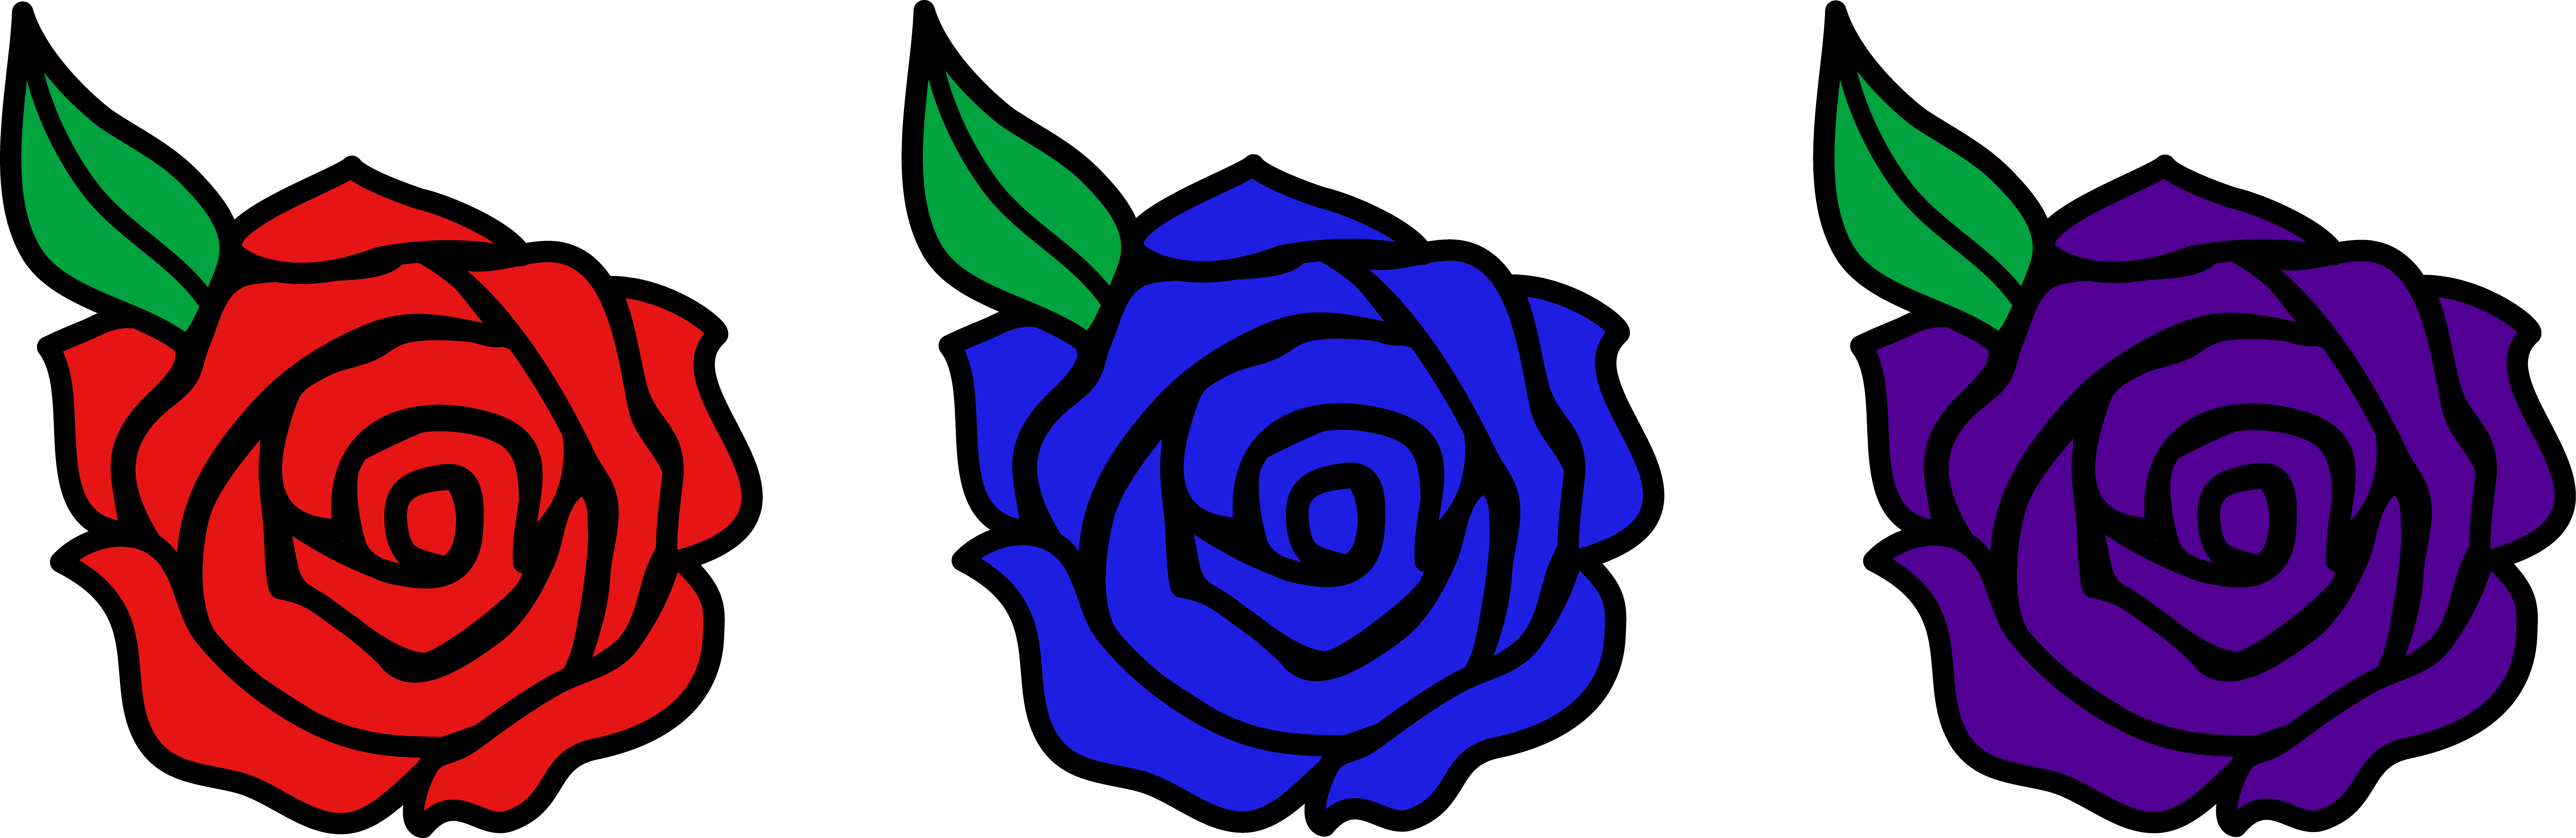 Free small rose.